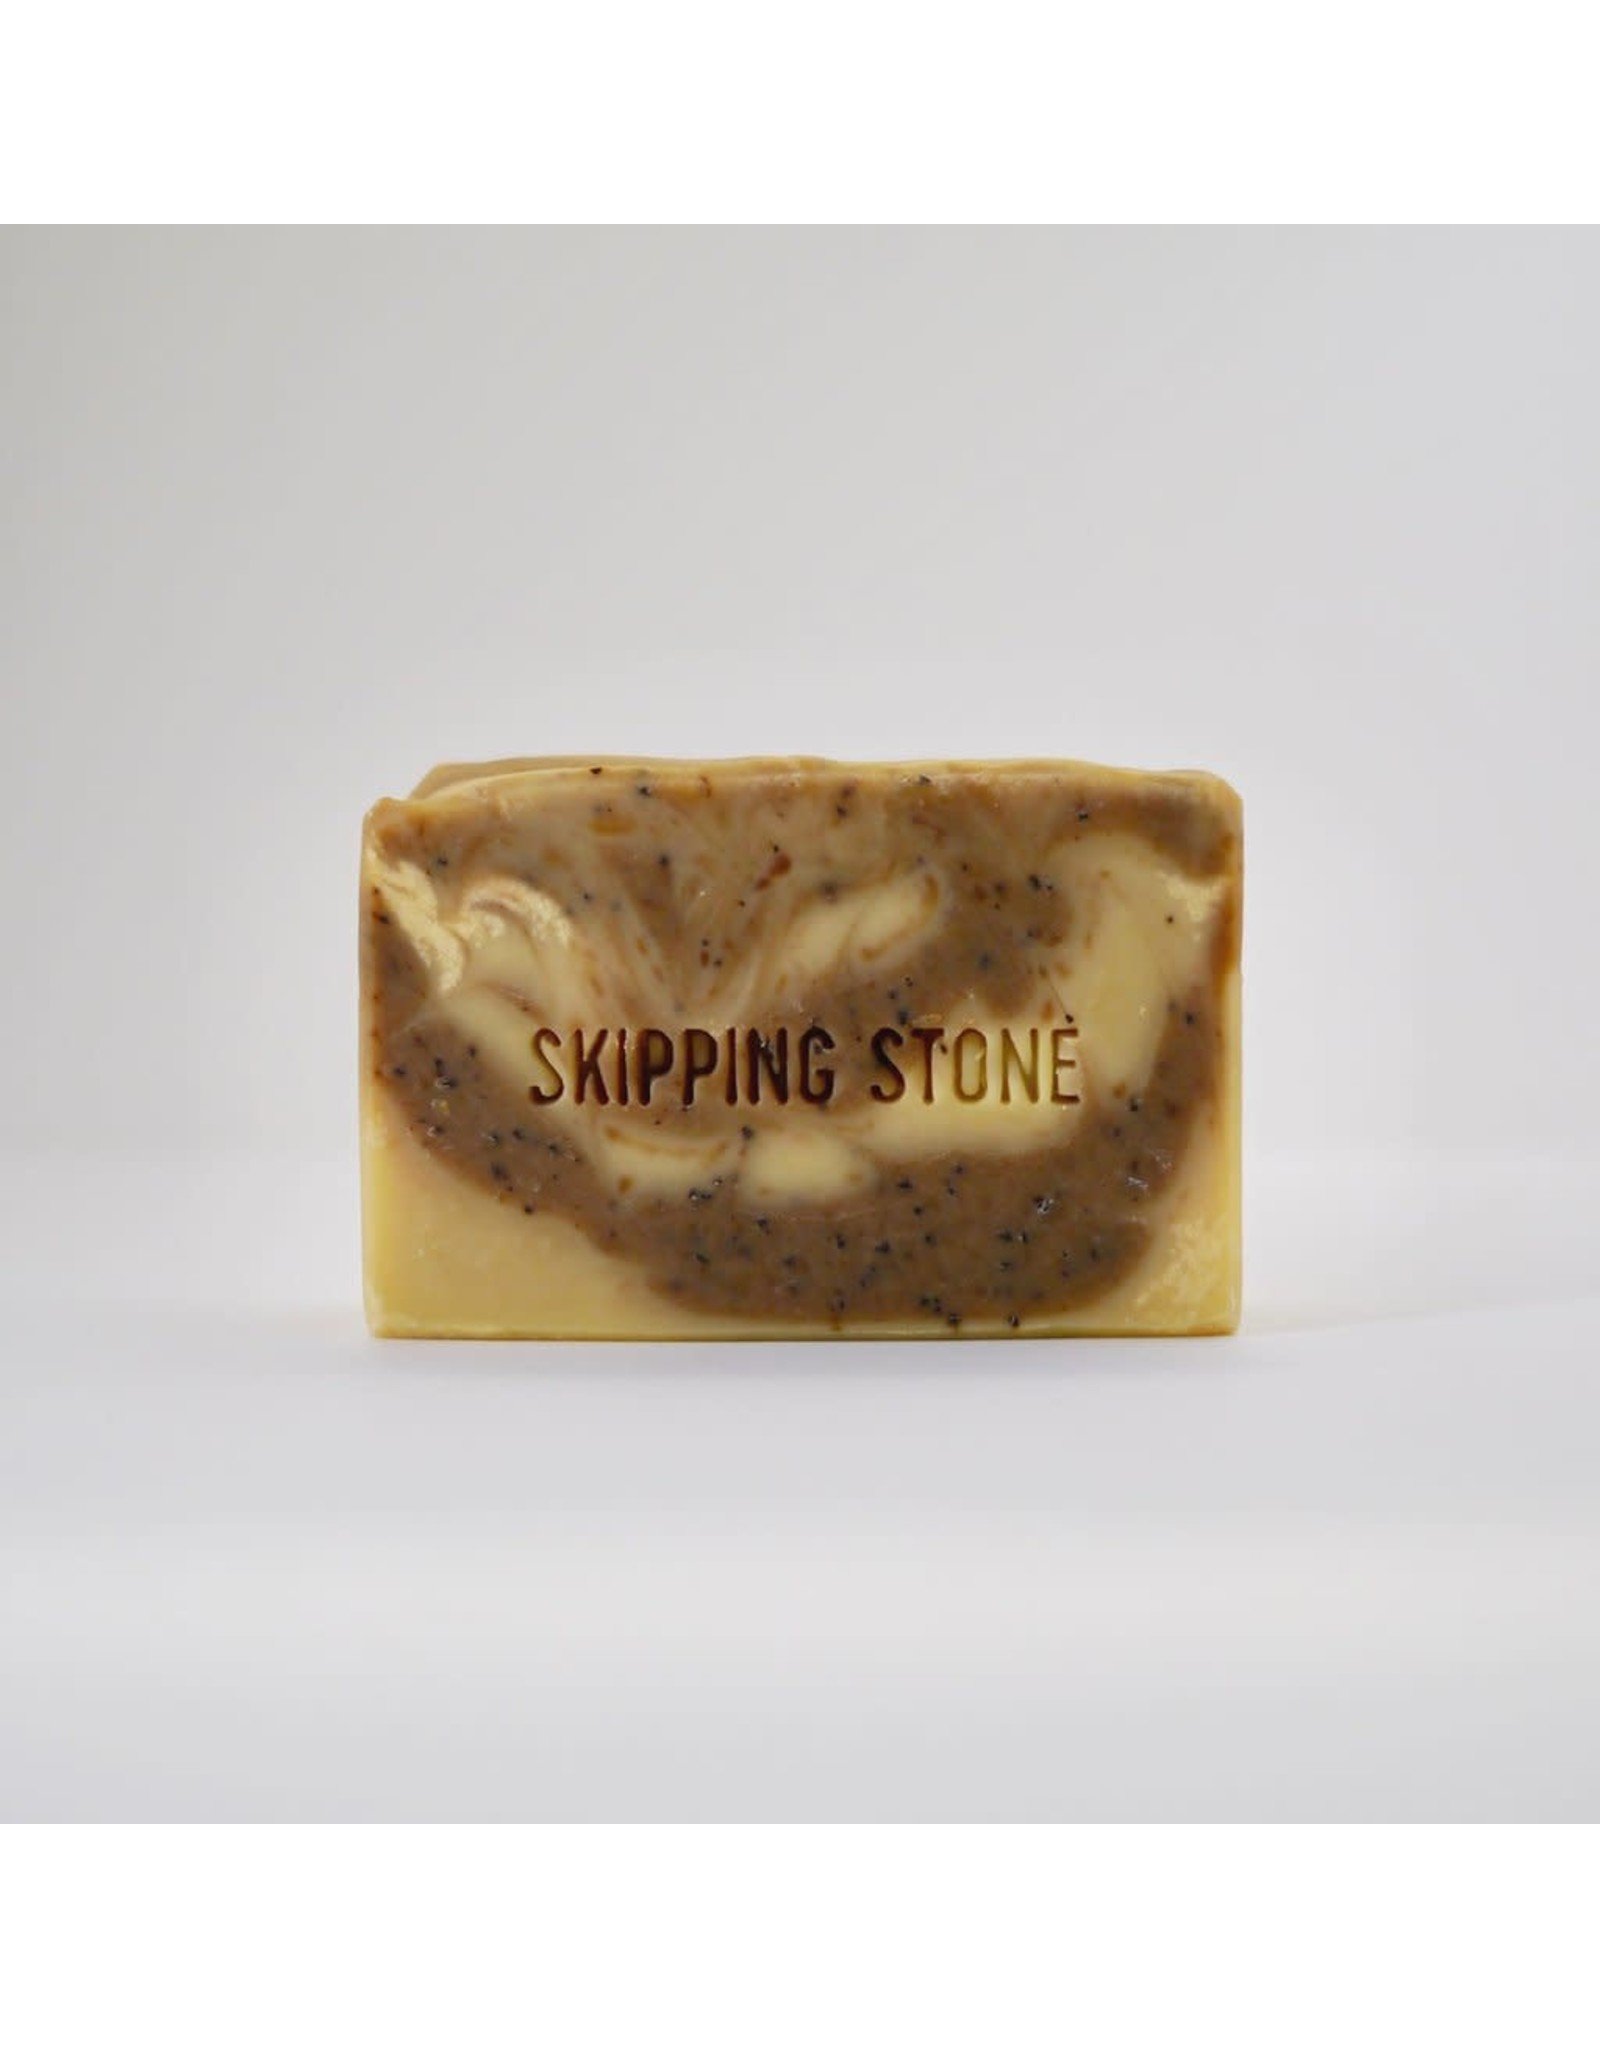 Skipping Stone Soap Body & Face Soap by Skipping Stone Soap